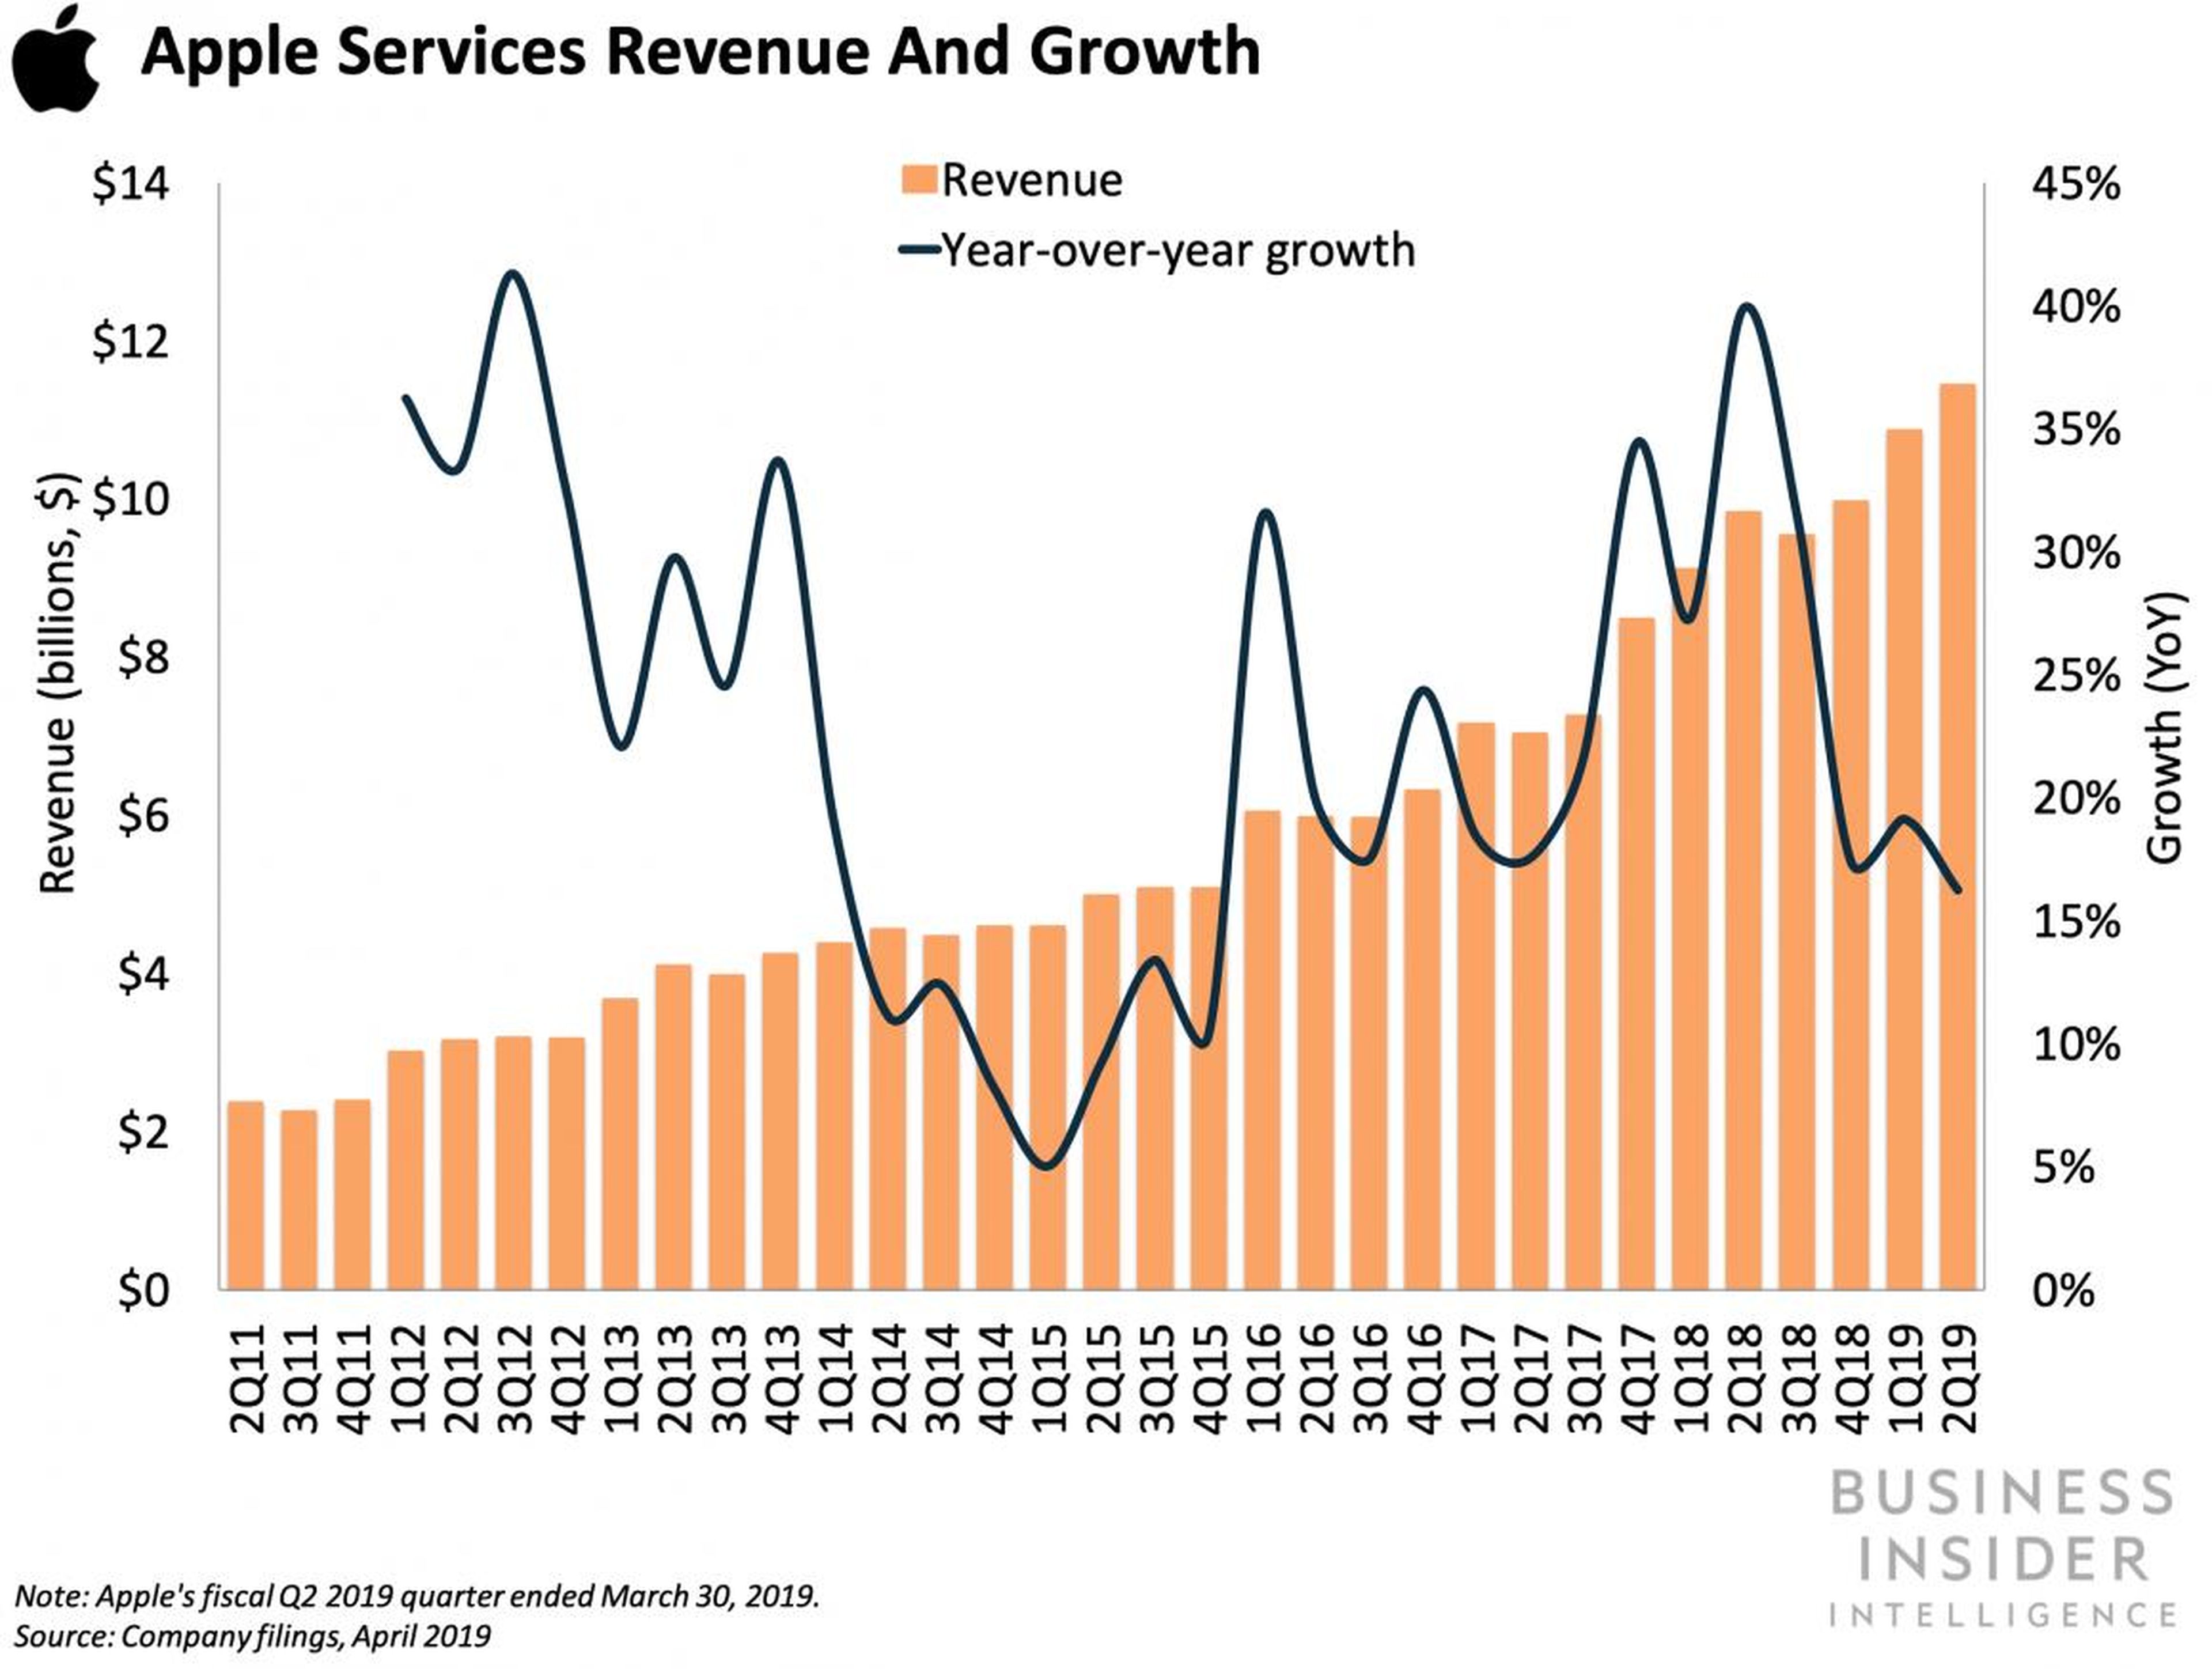 But growth in Services has held up.